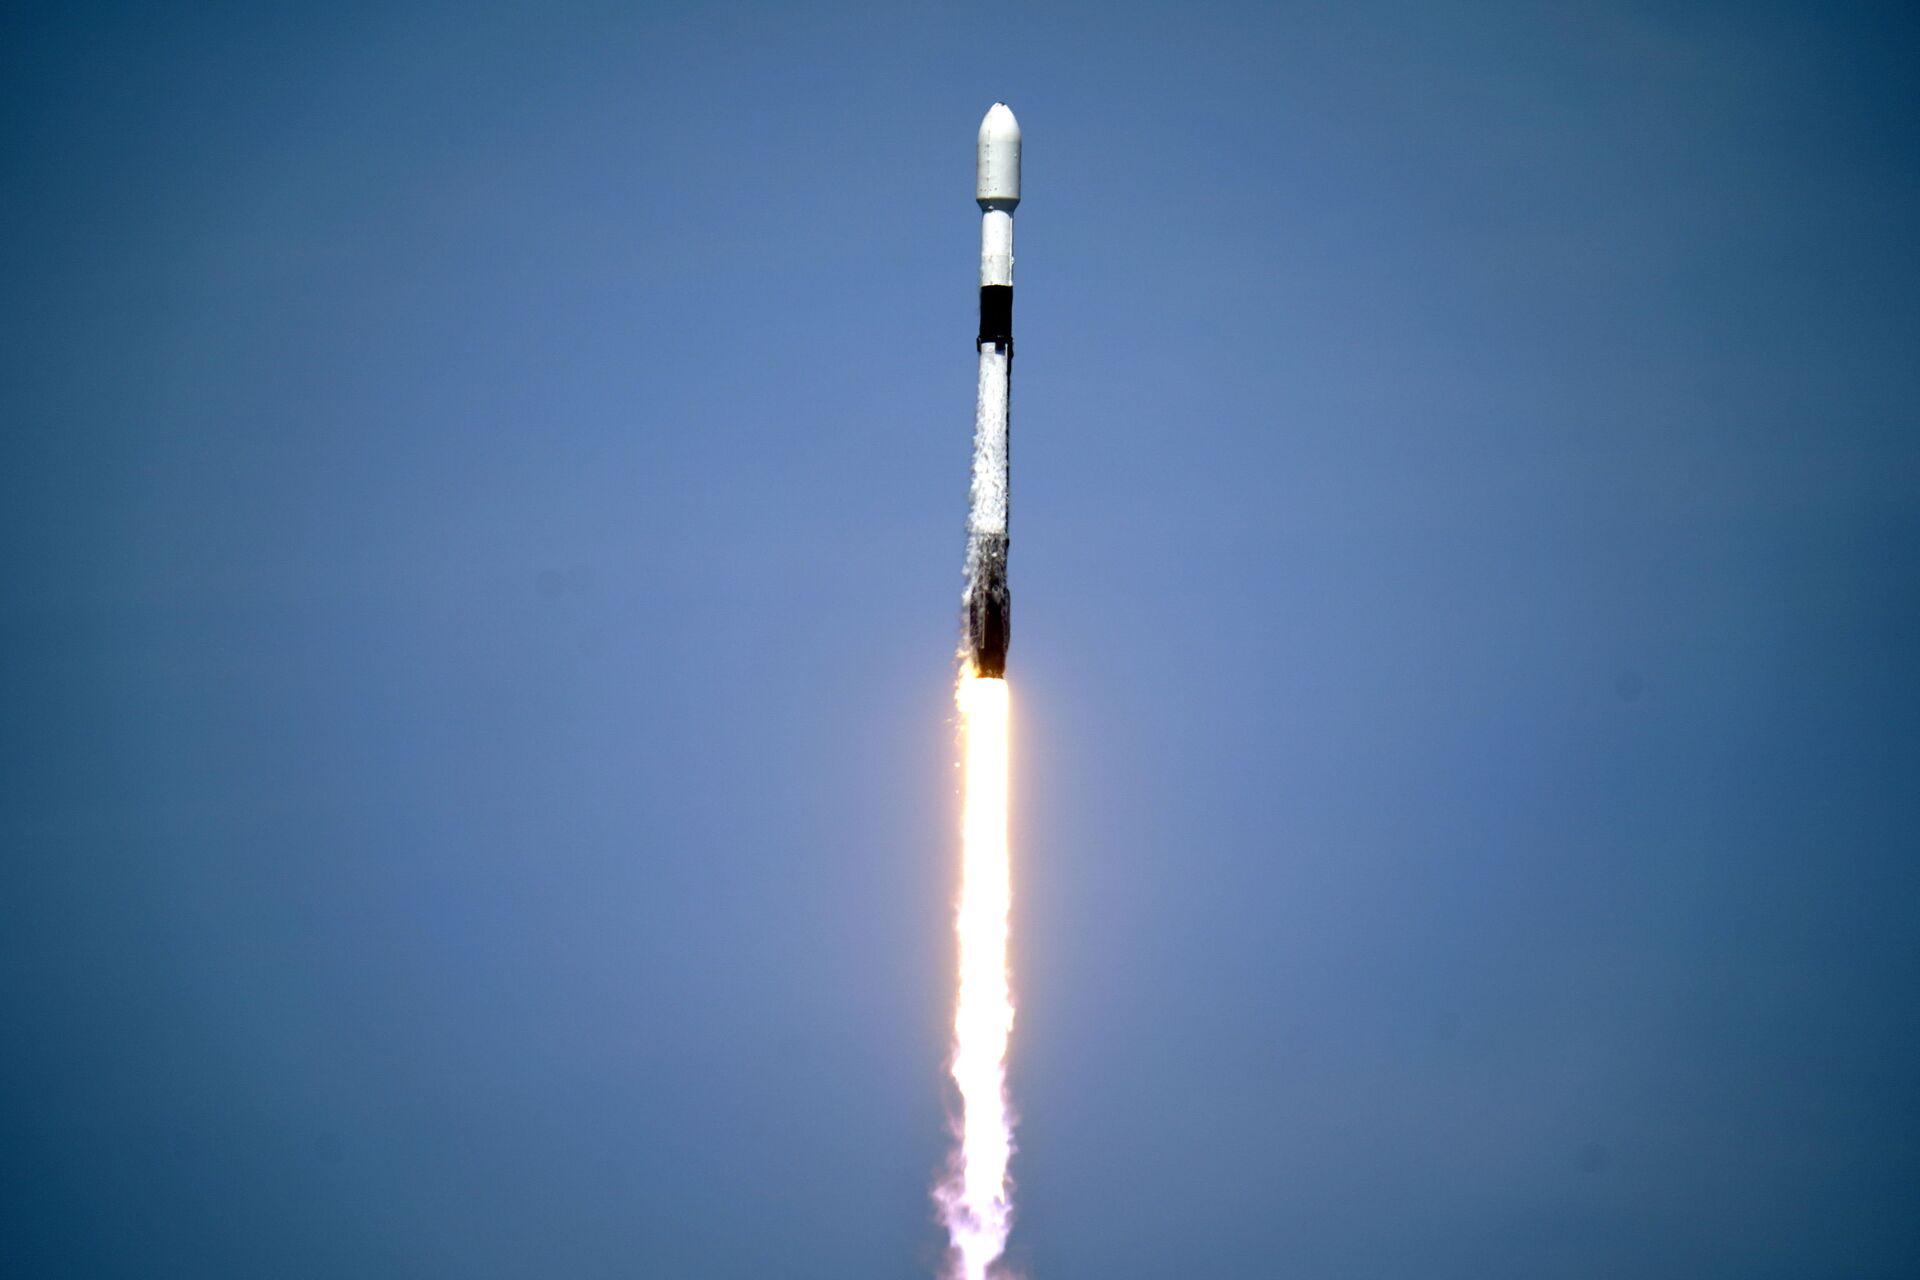 A SpaceX Falcon 9 rocket with the 26th batch of approximately 60 satellites for SpaceX's Starlink broadband network lifts off from pad 39A at the Kennedy Space Center in Cape Canaveral, Fla., Tuesday, May 4, 2021.  - Sputnik International, 1920, 31.07.2023